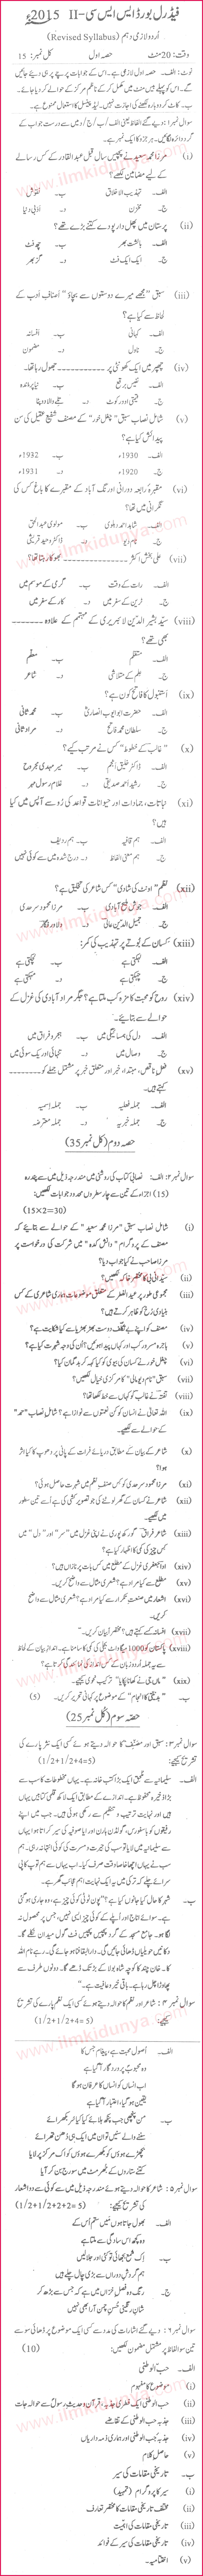 Past Papers 2015 Federal Board 10th Class Urdu